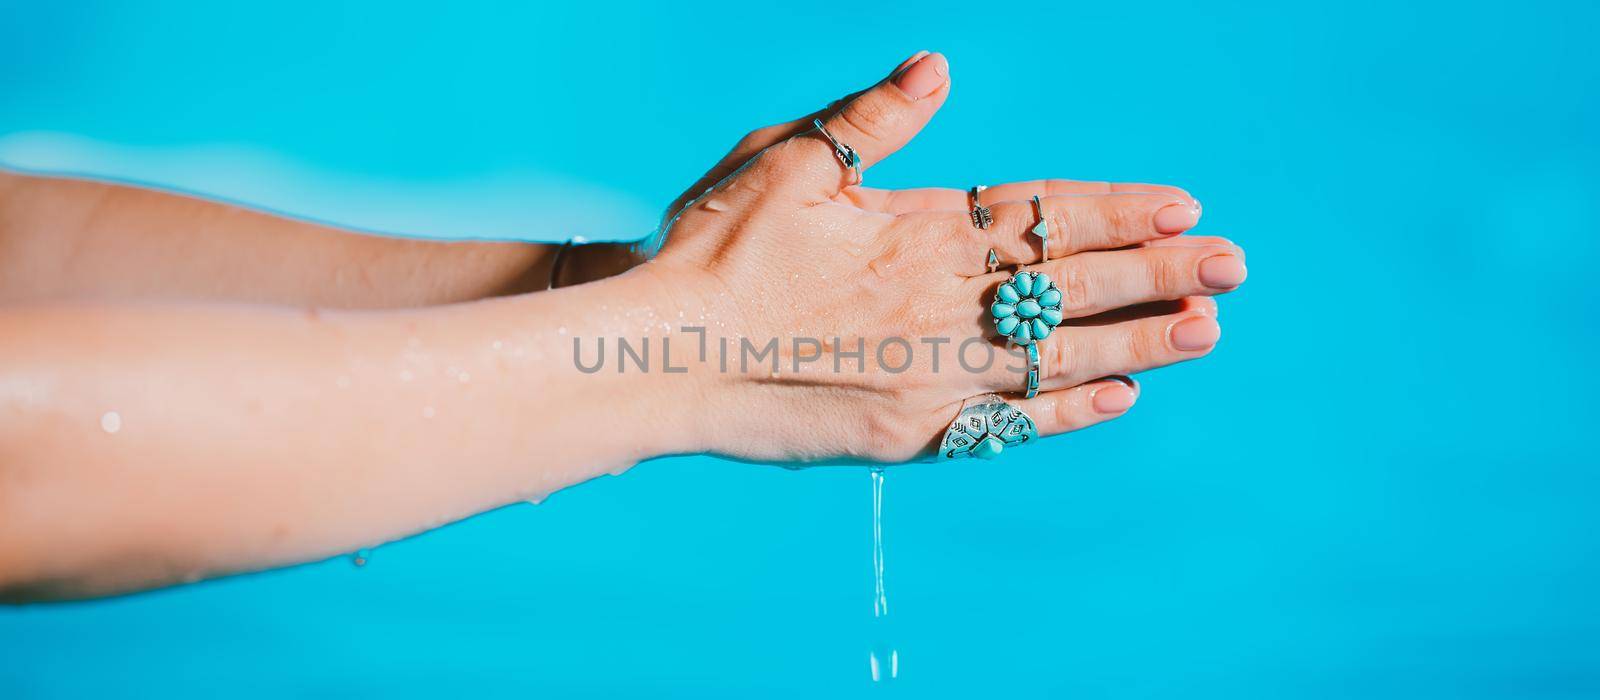 Priestess woman pours out clean water. Palms with gypsy boho rings holding clear aqua. Meditation, praying, gratitude, purity background. High quality photo